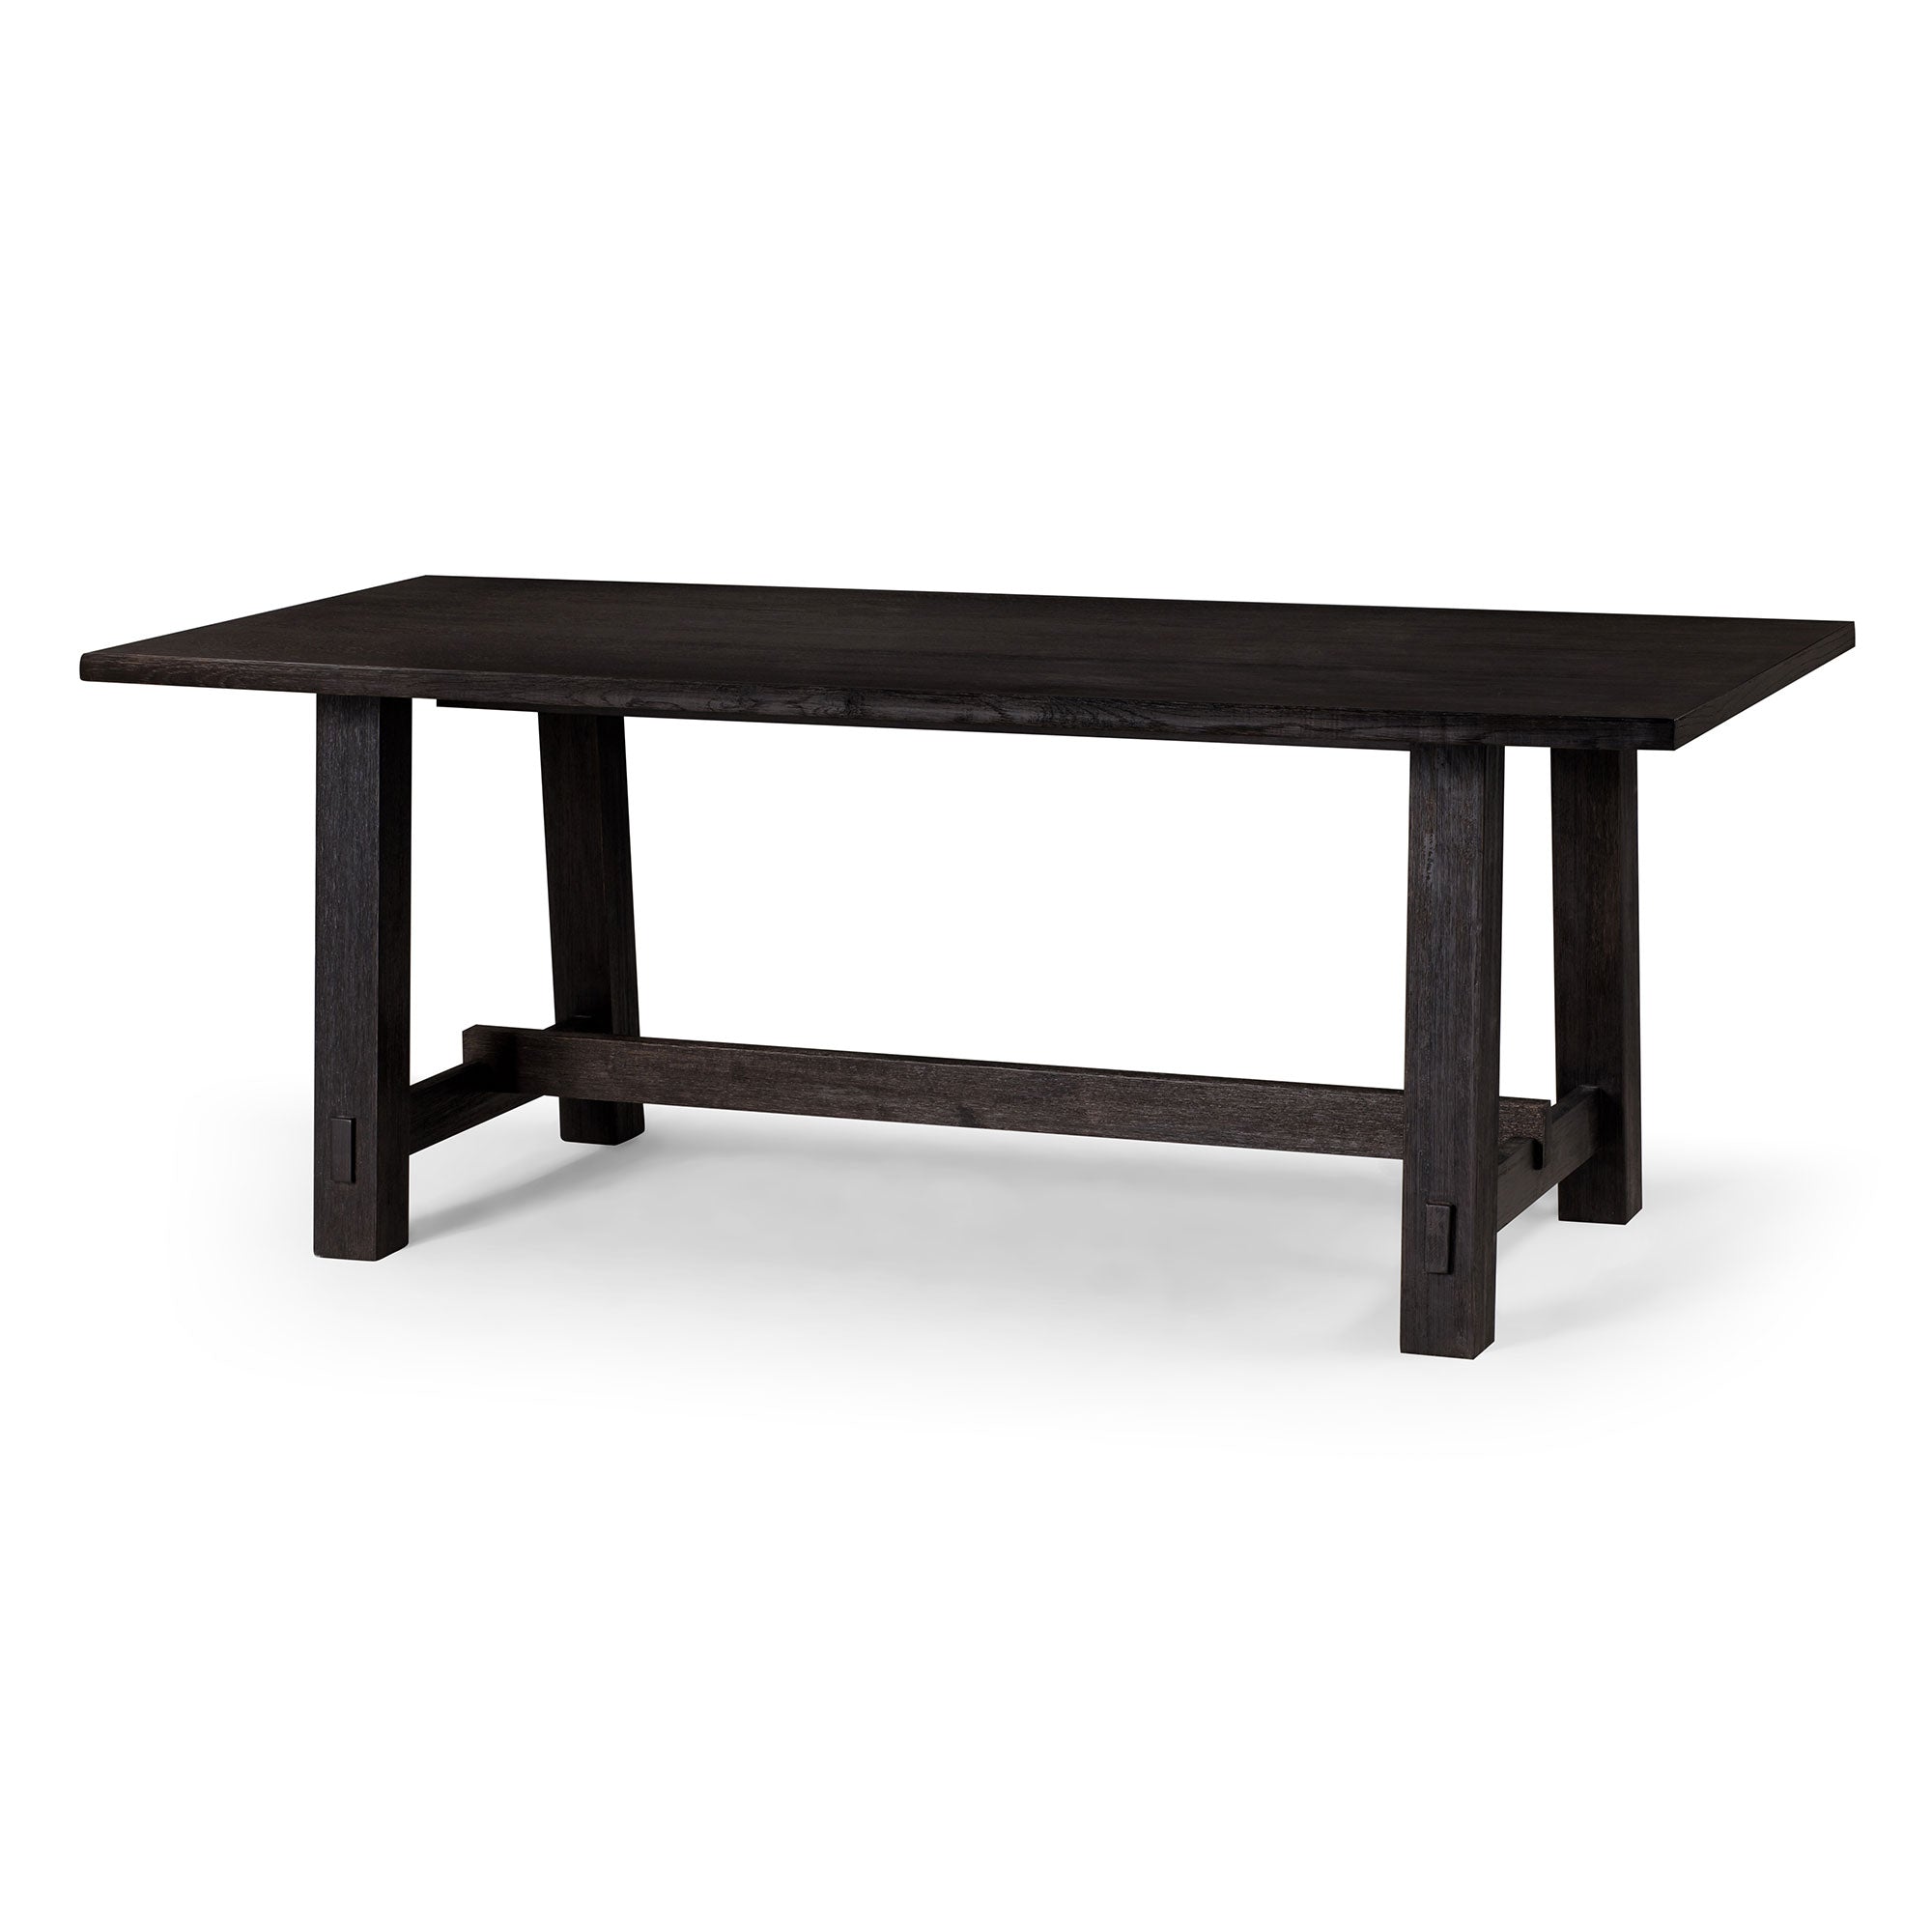 Maven-Lane-Yves-Rectangular-Wooden-Dining-Table-in-Weathered-Black-Finish-Kitchen-&-Dining-Room-Tables